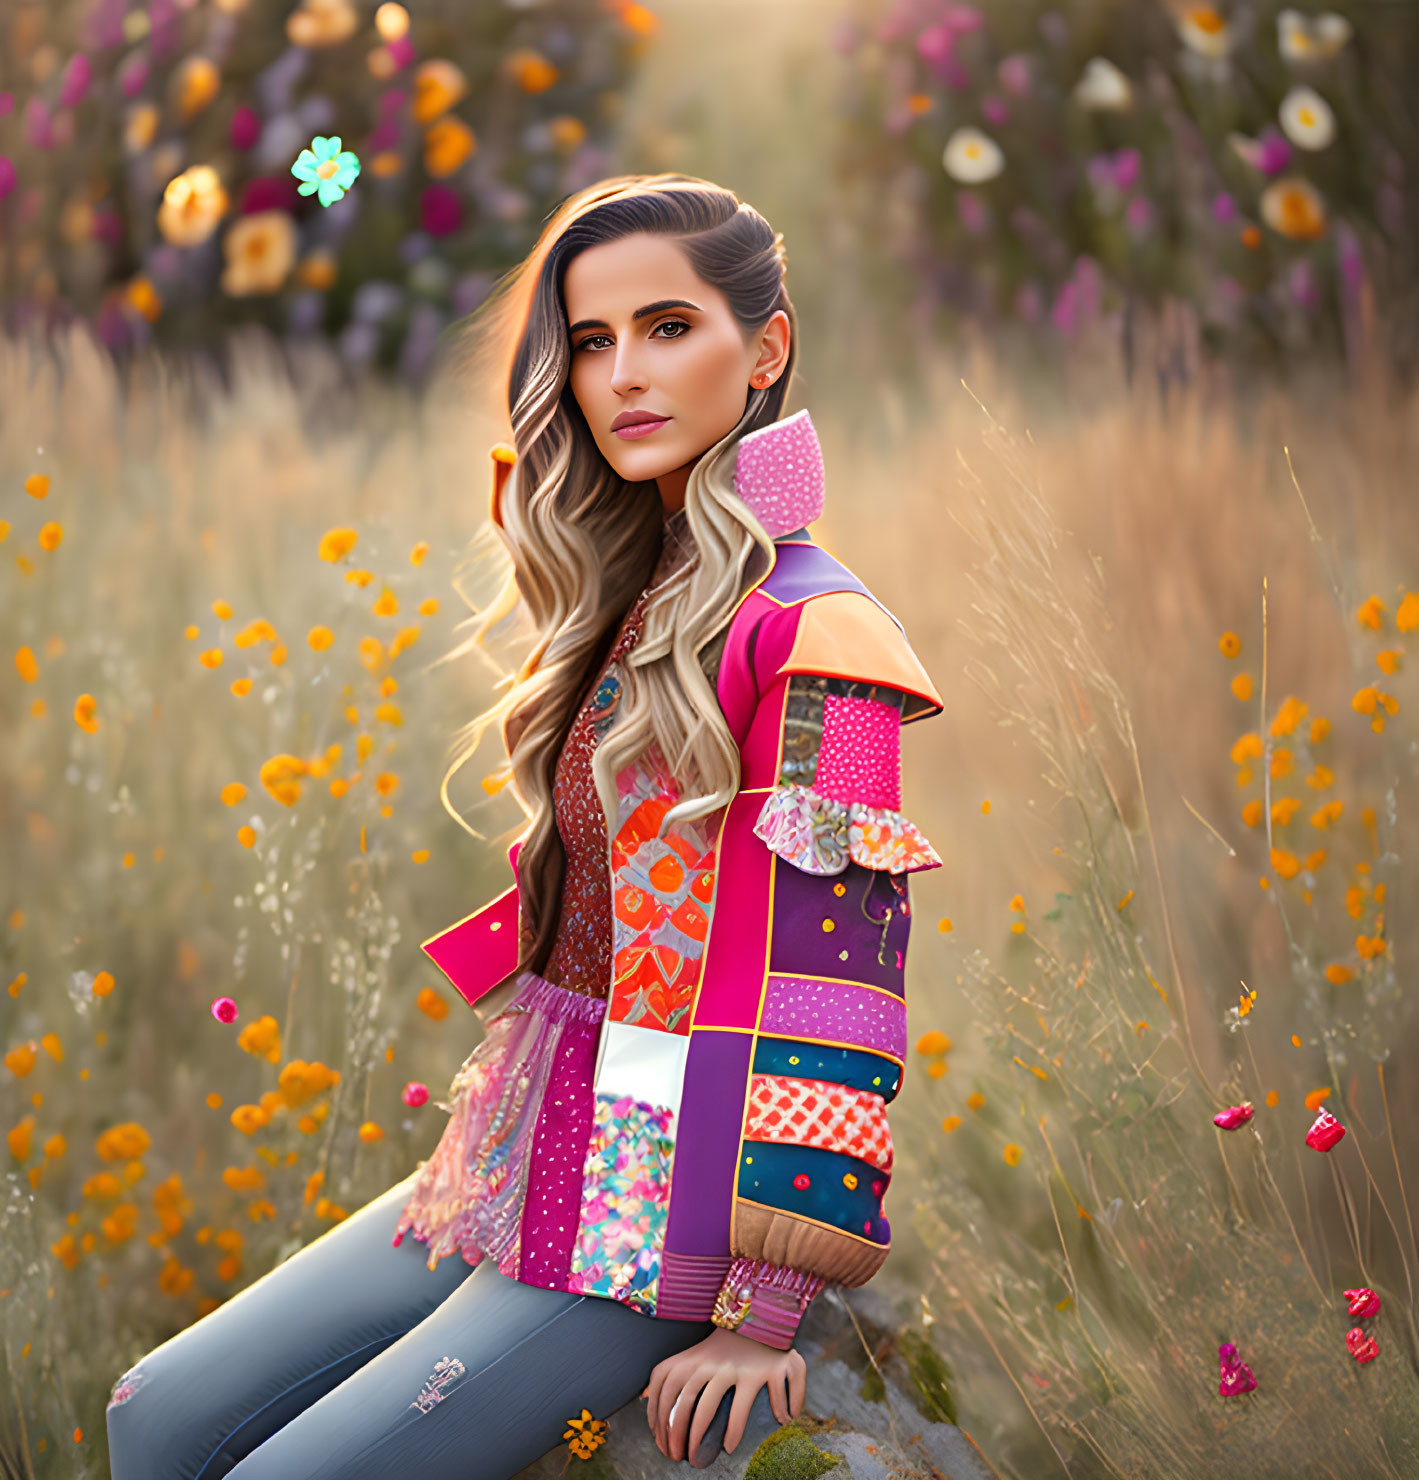 Colorful Patchwork Jacket Woman Sitting in Wildflower Meadow at Golden Hour